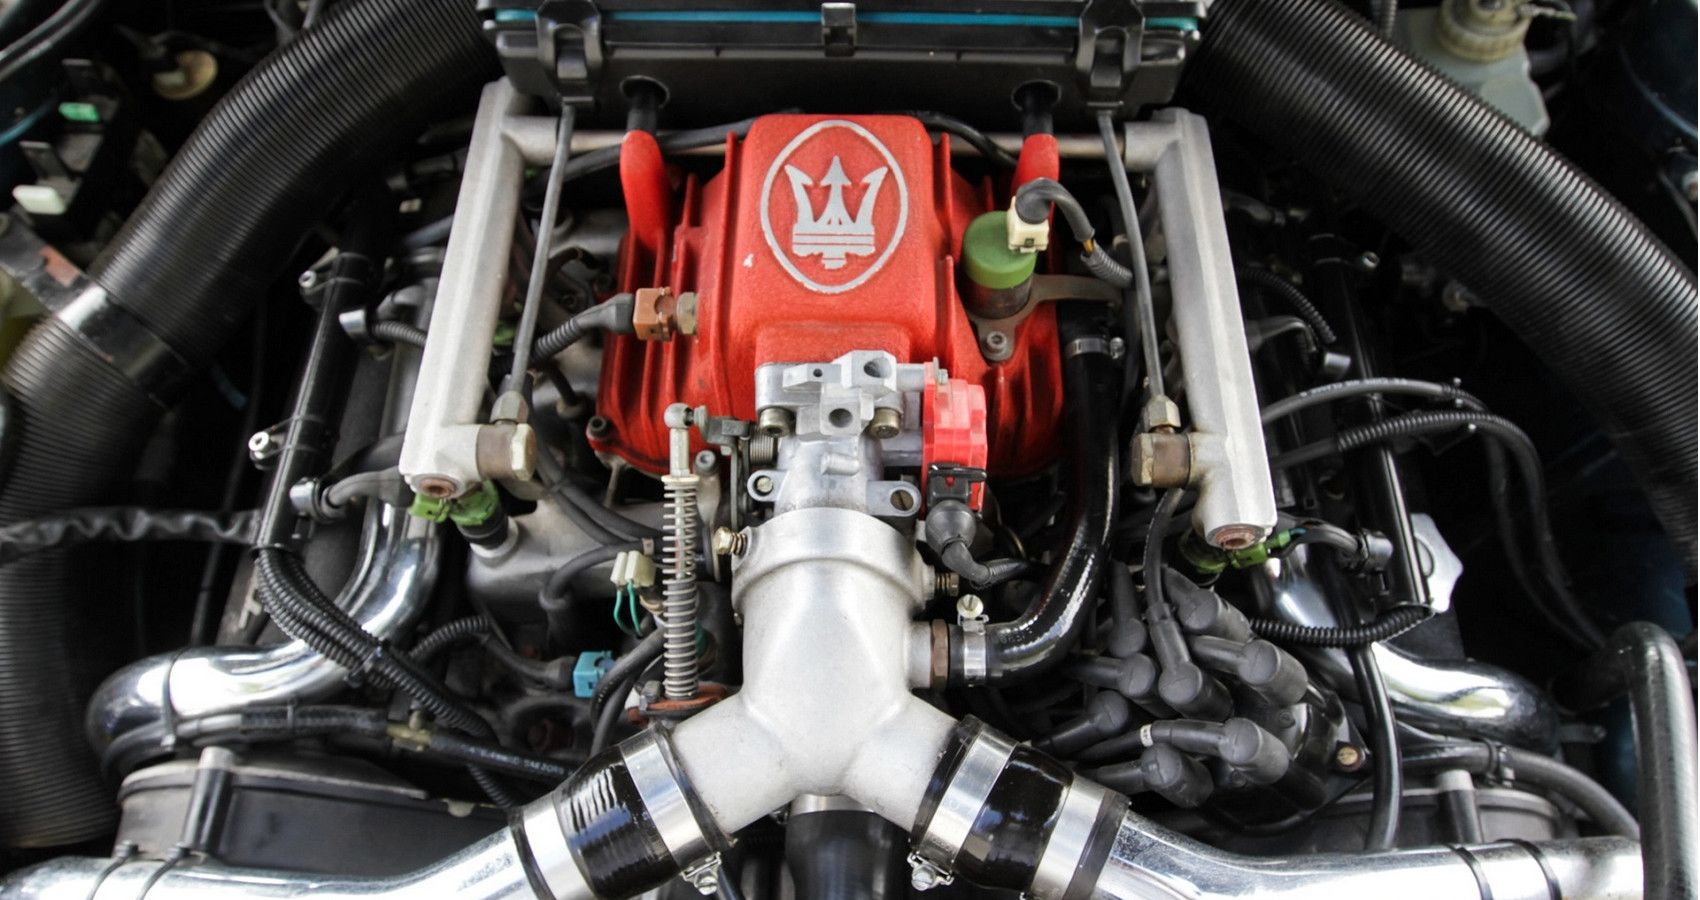 10 Forced Induction 6-Cylinder Engines That Are Absolute Junk